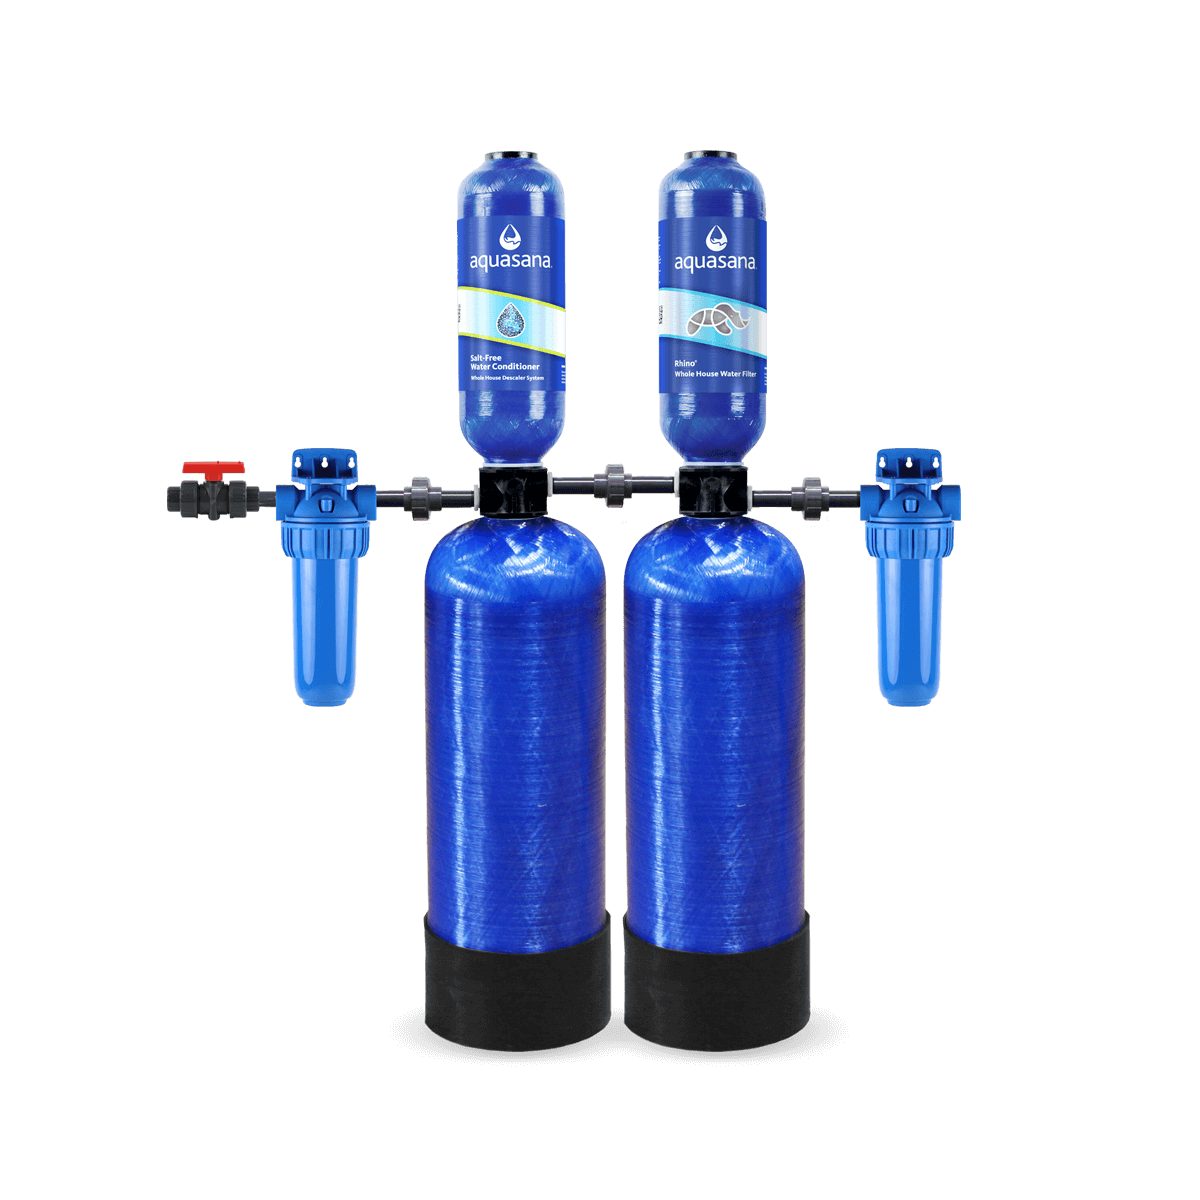 Whole House Water Filter System Home Water Filtration 4 Year/400,000 Gallons Aquasana